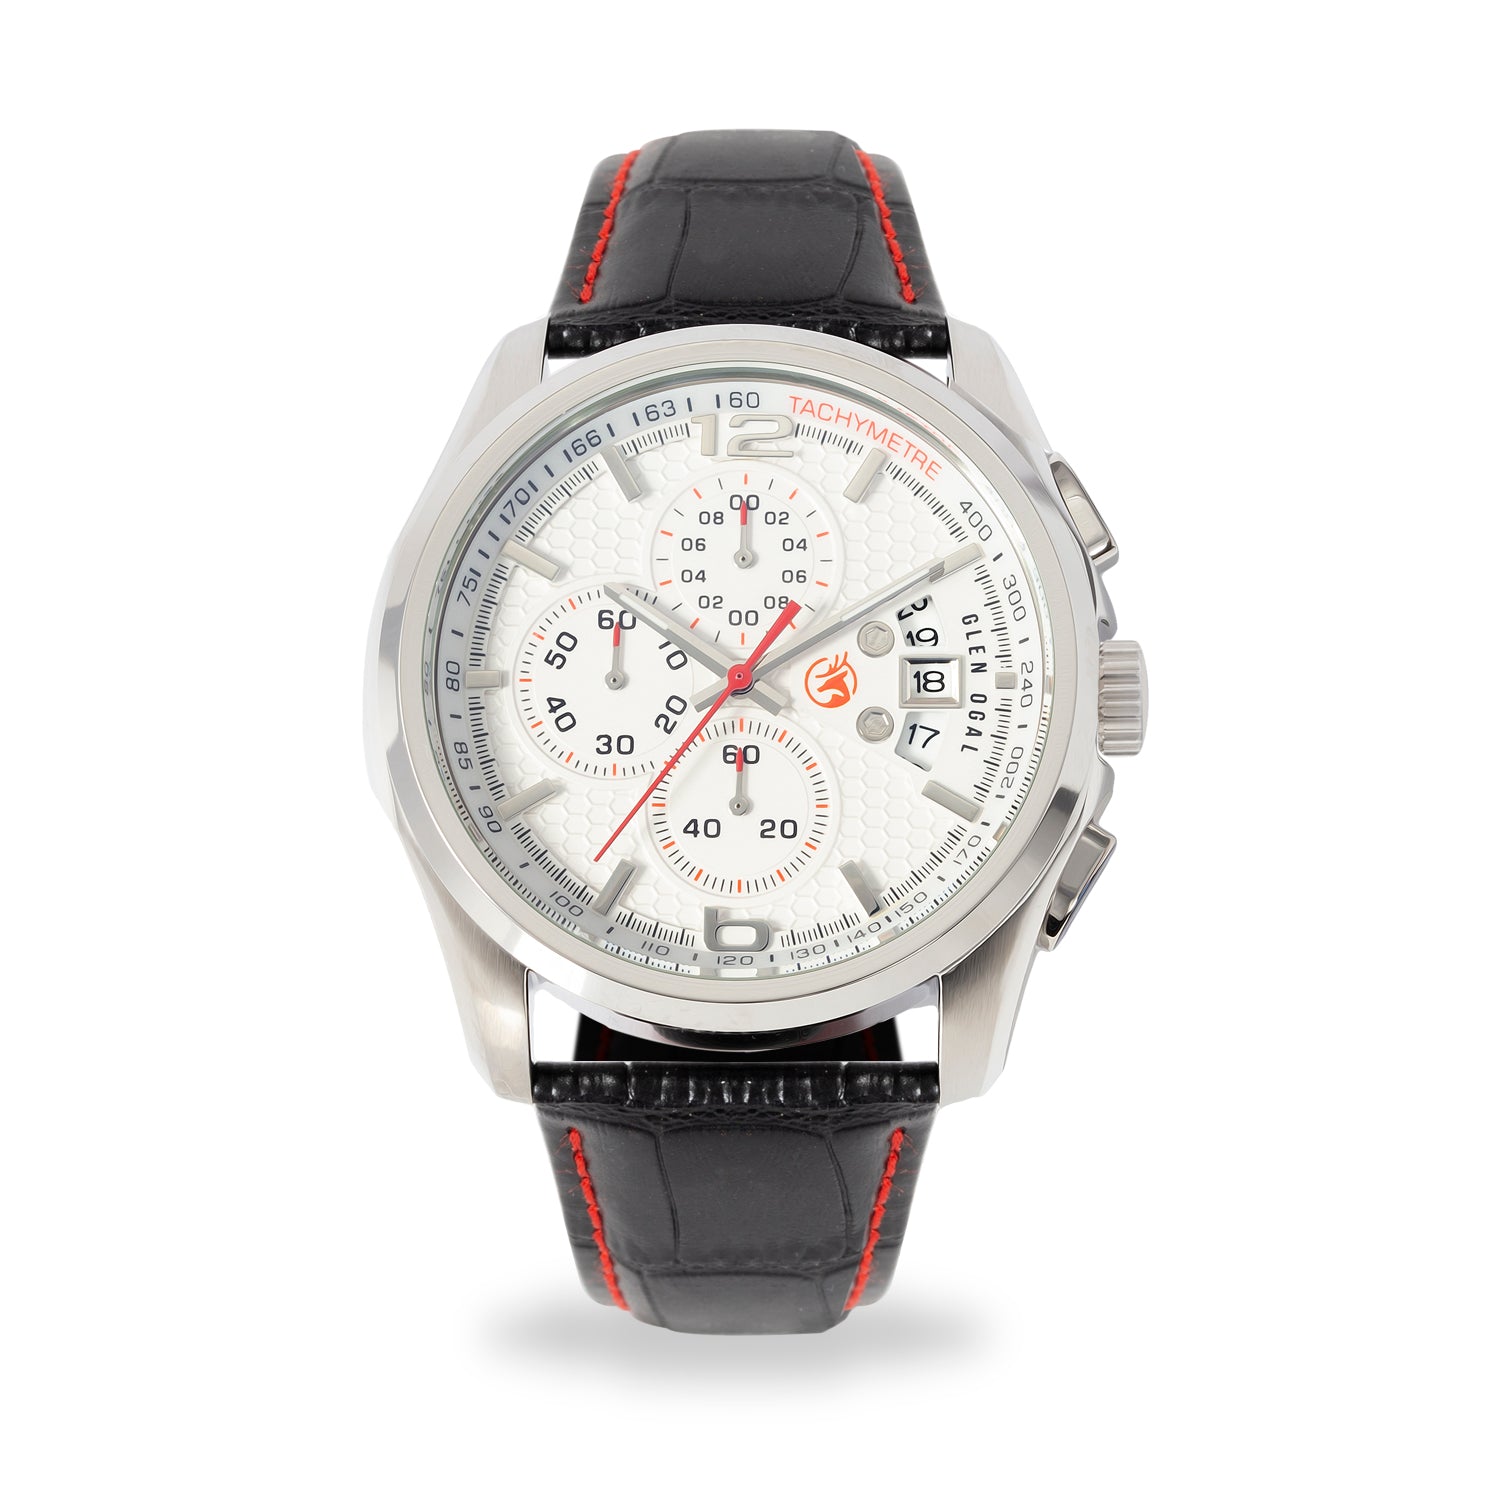 The Kenmore - Men's Chronograph Watch